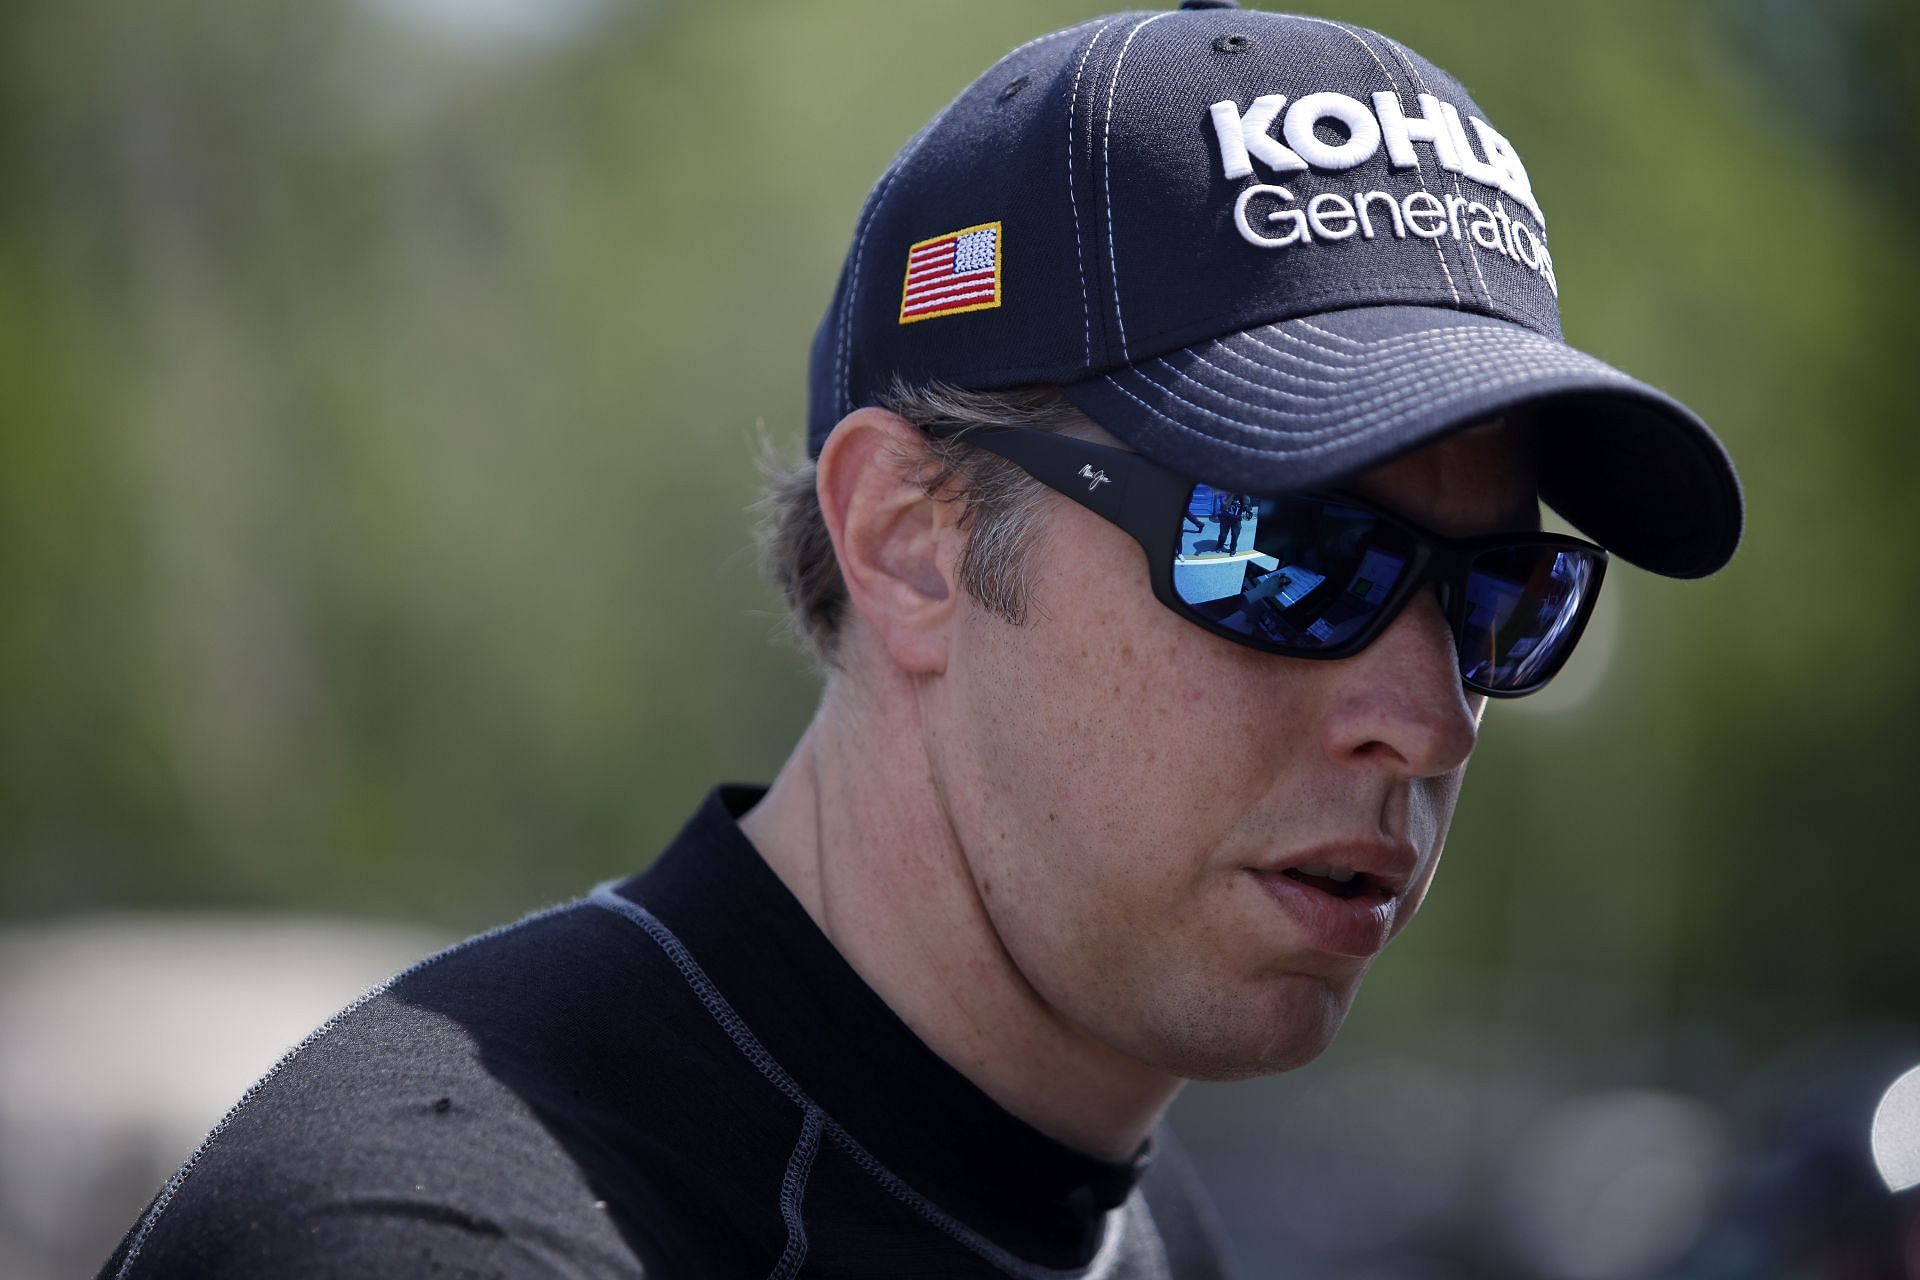 Brad Keselowski looks on during qualifying for the NASCAR Cup Series Kwik Trip 250 at Road America